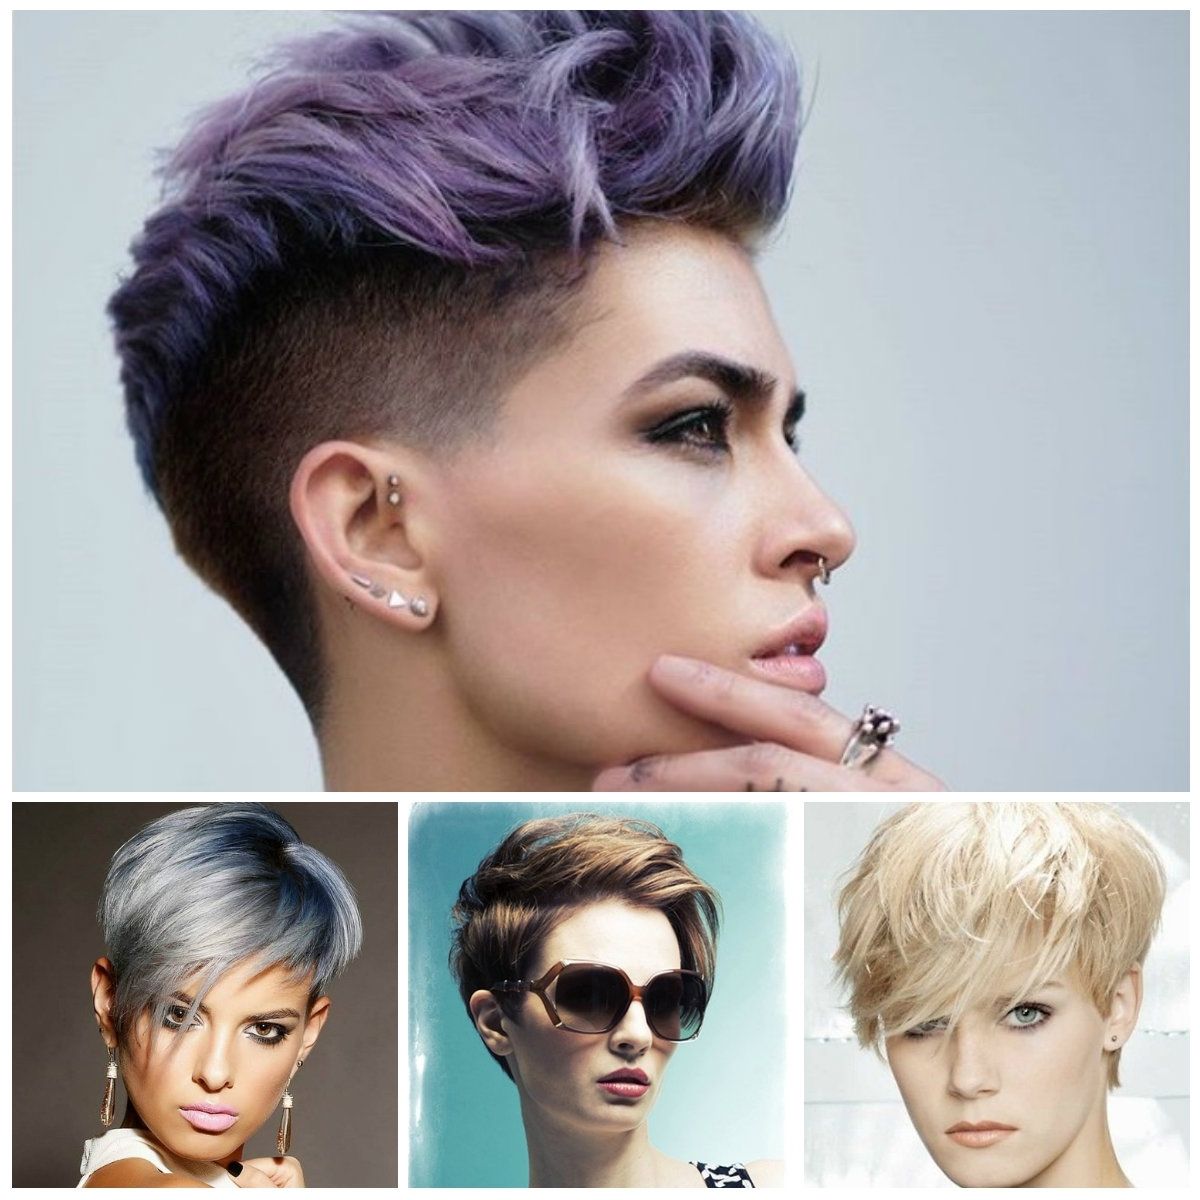 6 Hot Pixie Hairstyles – New Hairstyles 2017 For Long, Short And Intended For Latest Posh Pixie Hairstyles (View 14 of 15)